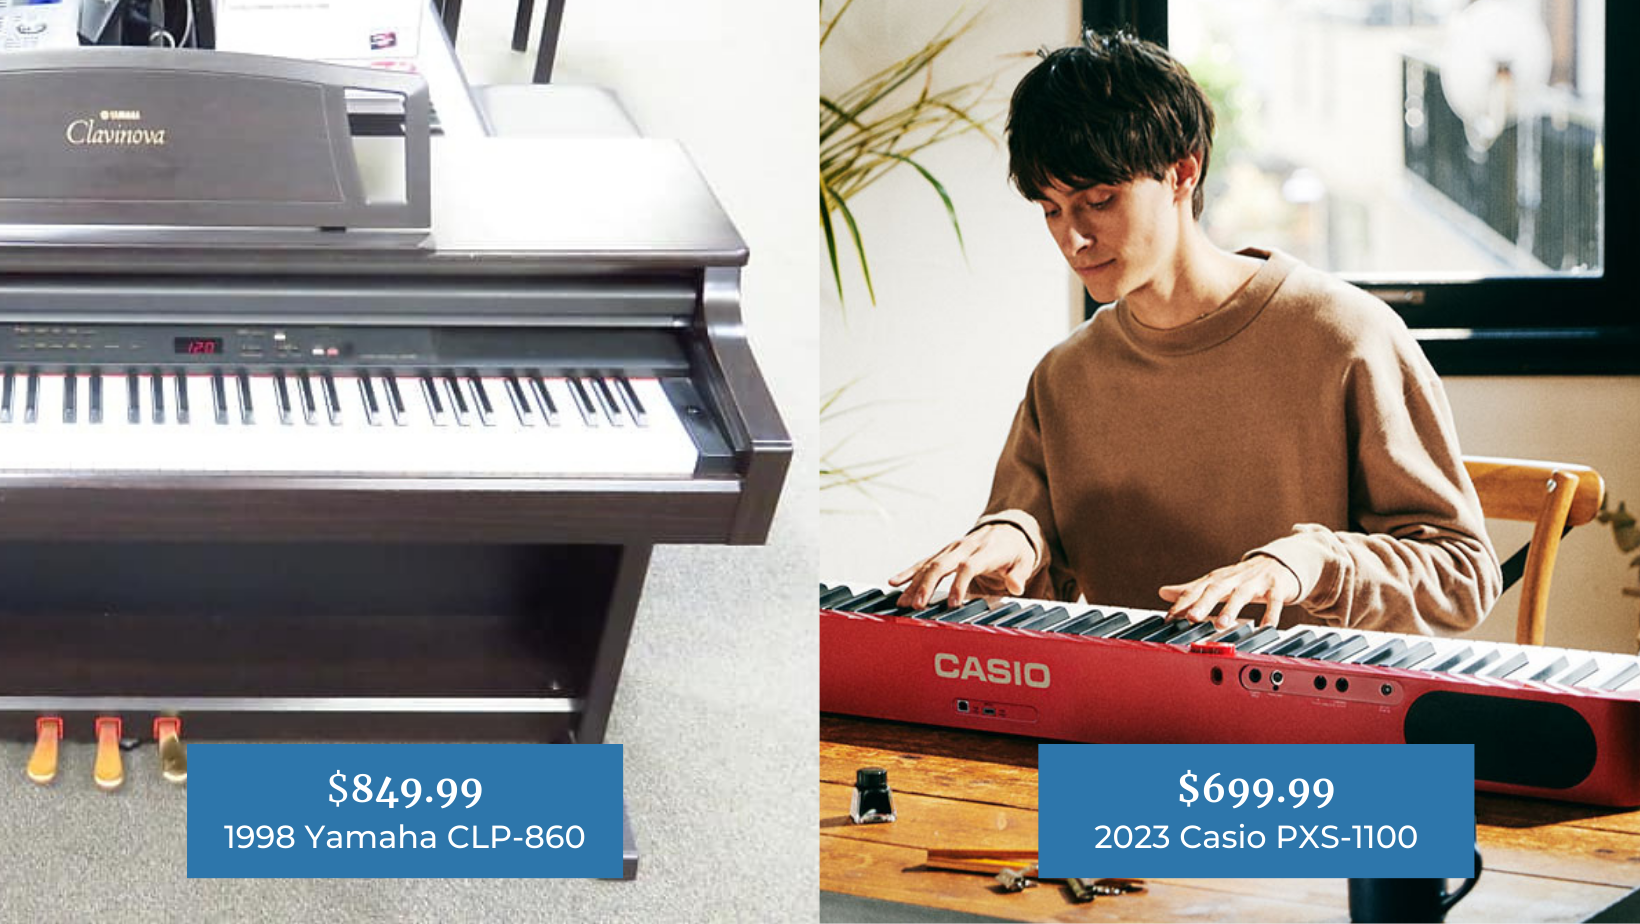 Price comparison between two digital pianos: $899 Yamaha Clavinova from 1998 vs $650 Casio PXS1100 in 2023.